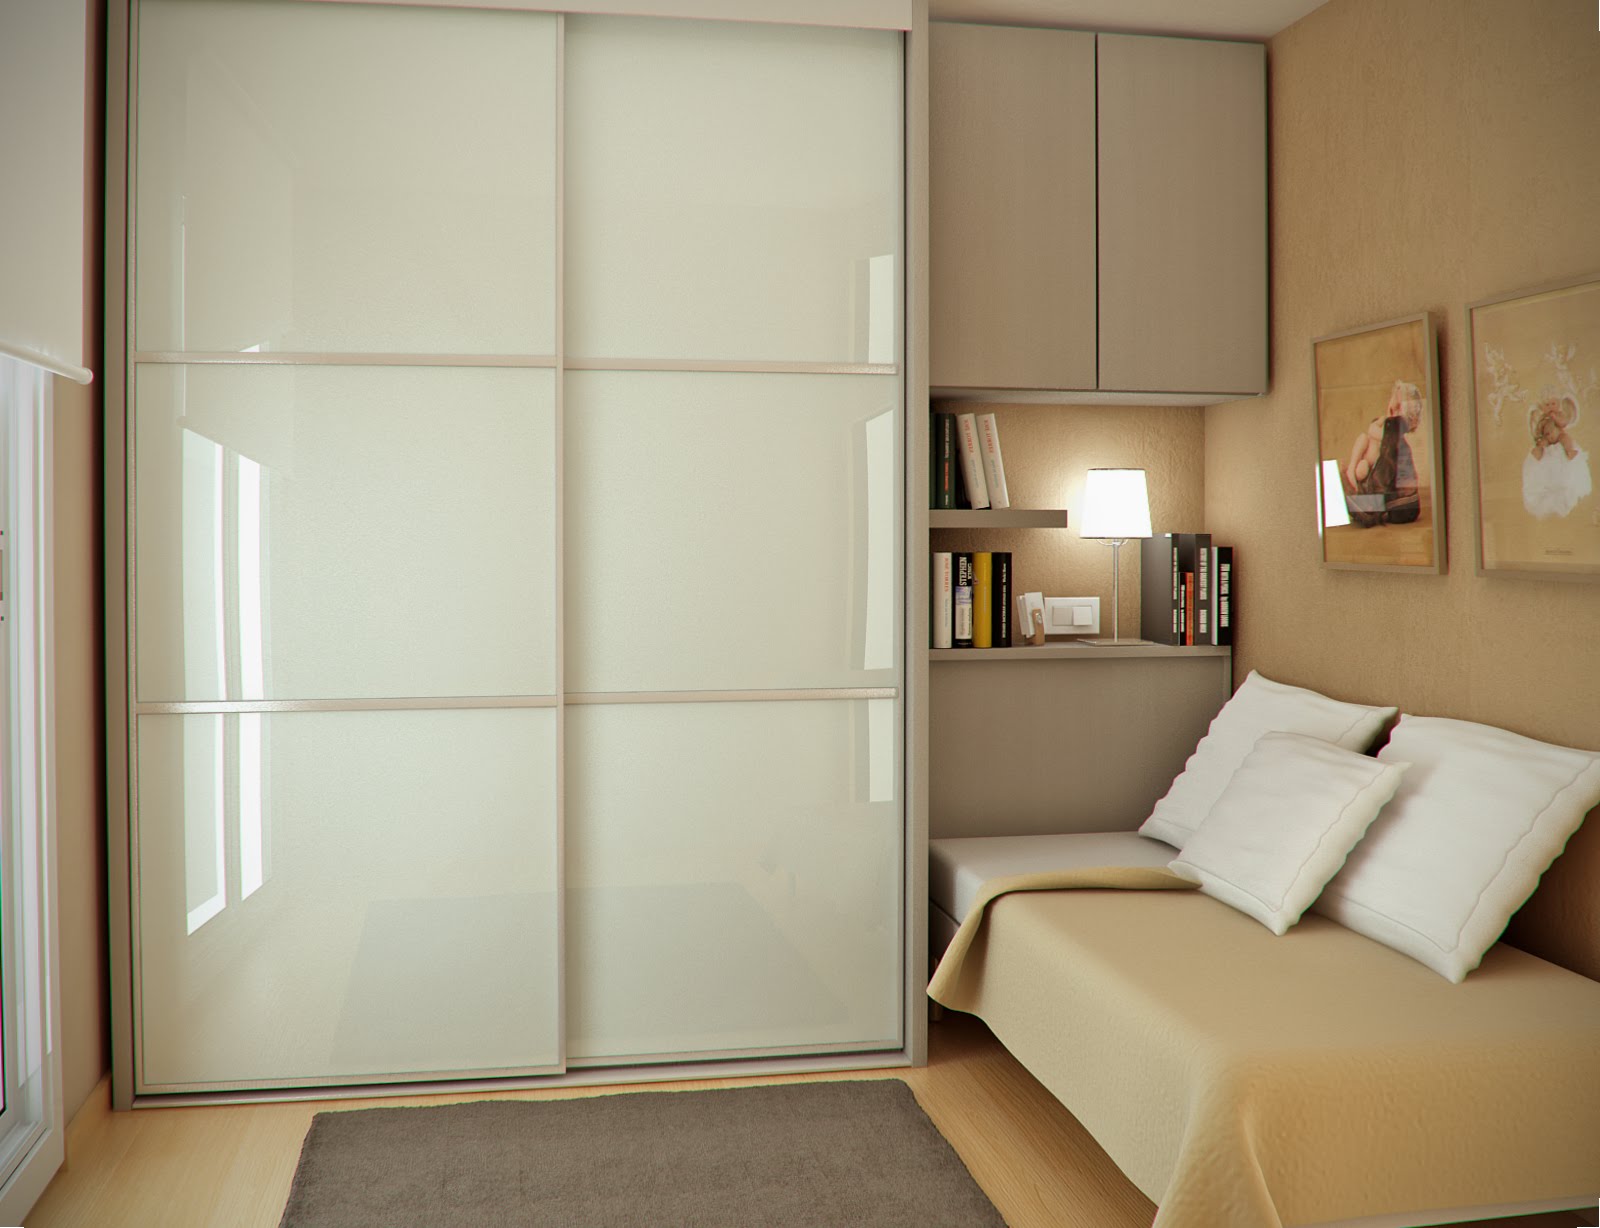 personable-bedrooms-simple-and-space-saving-decor-for-small-bedroom-design-by-sergi-mengot-very-small-bedroom-design